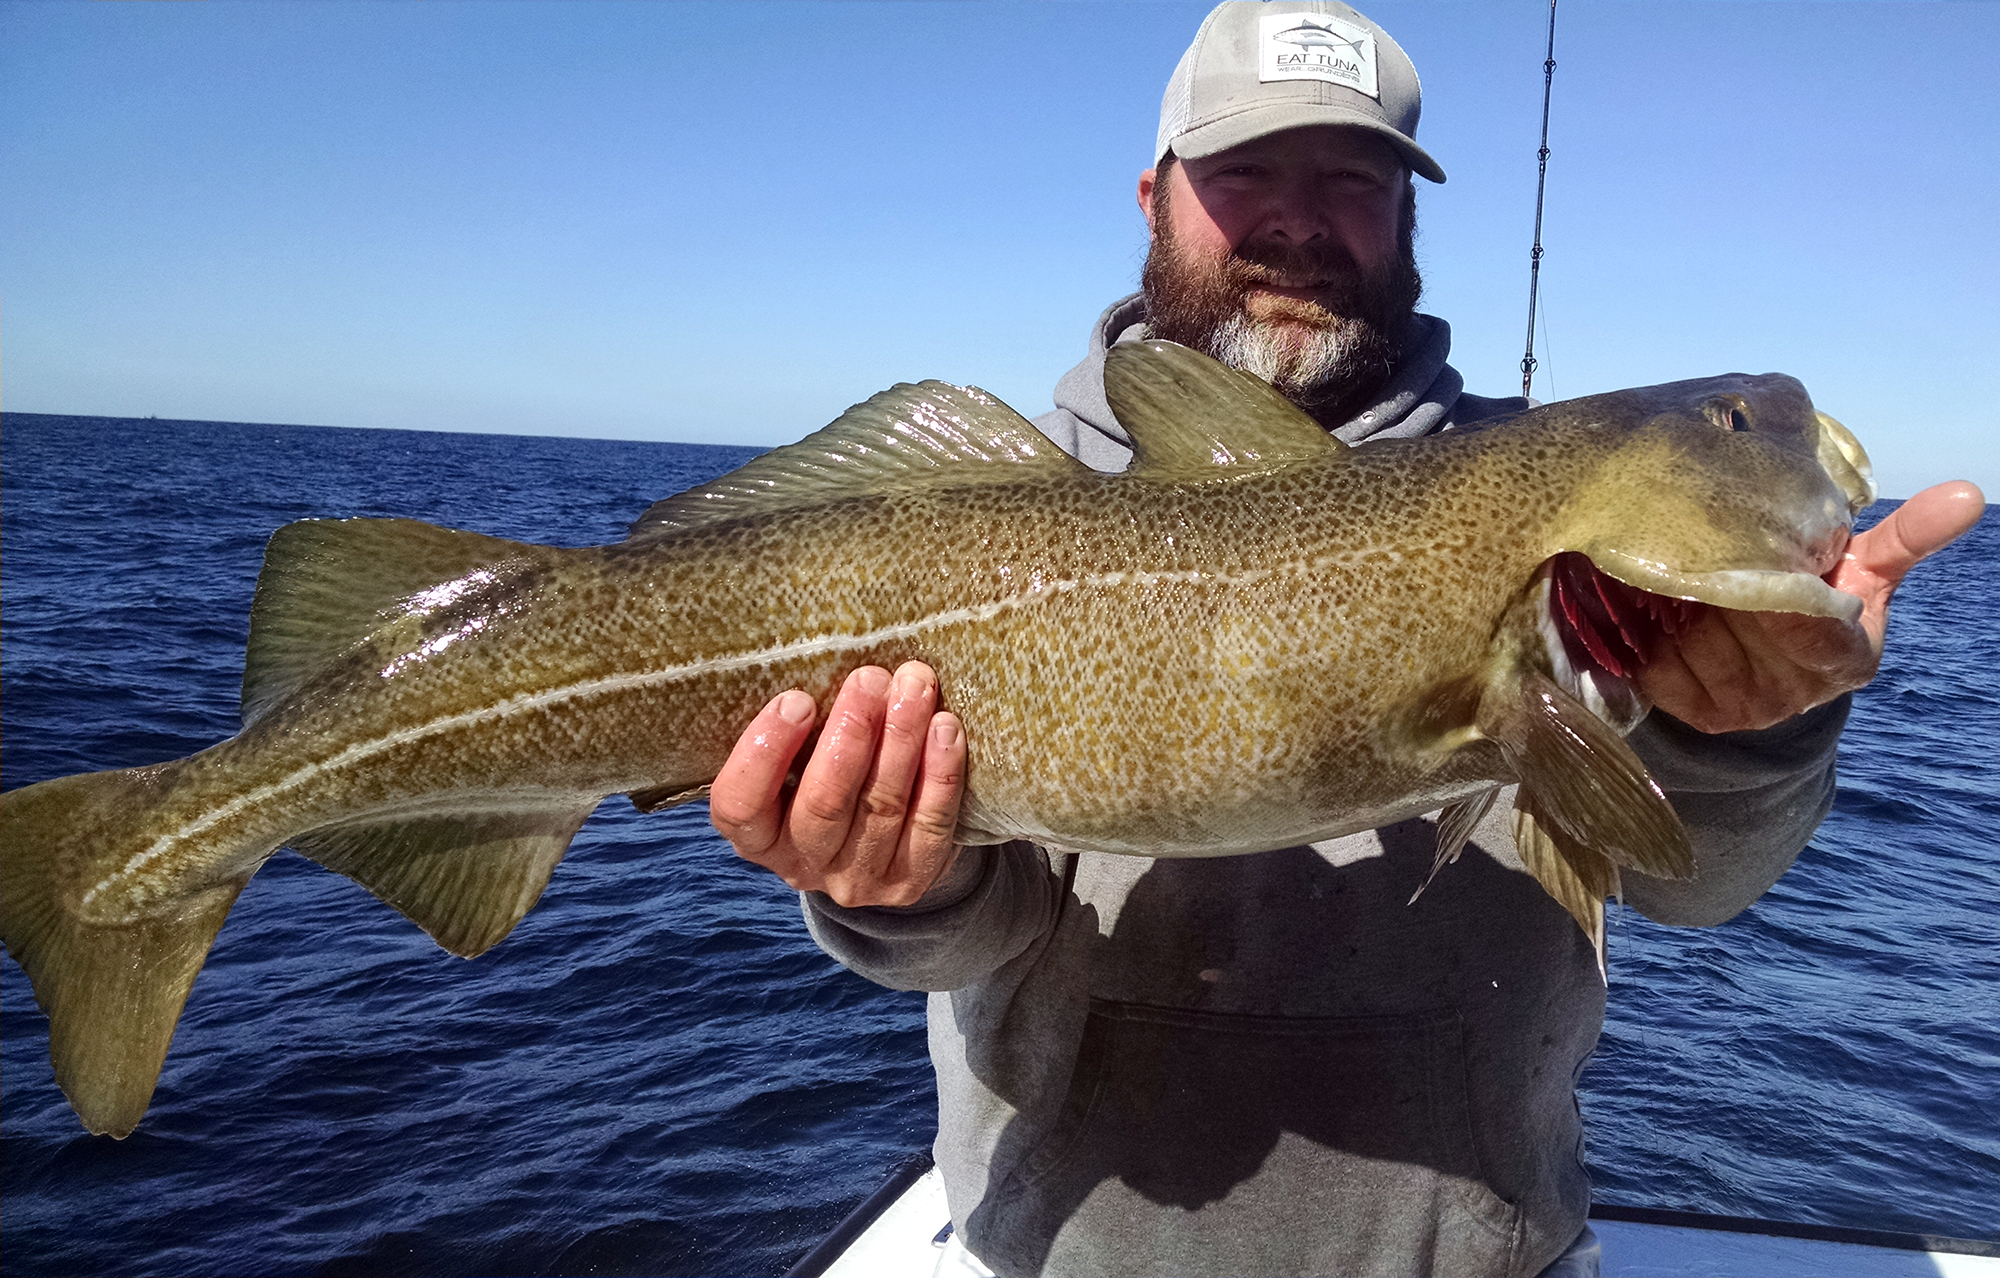 Pete with a nice Cod